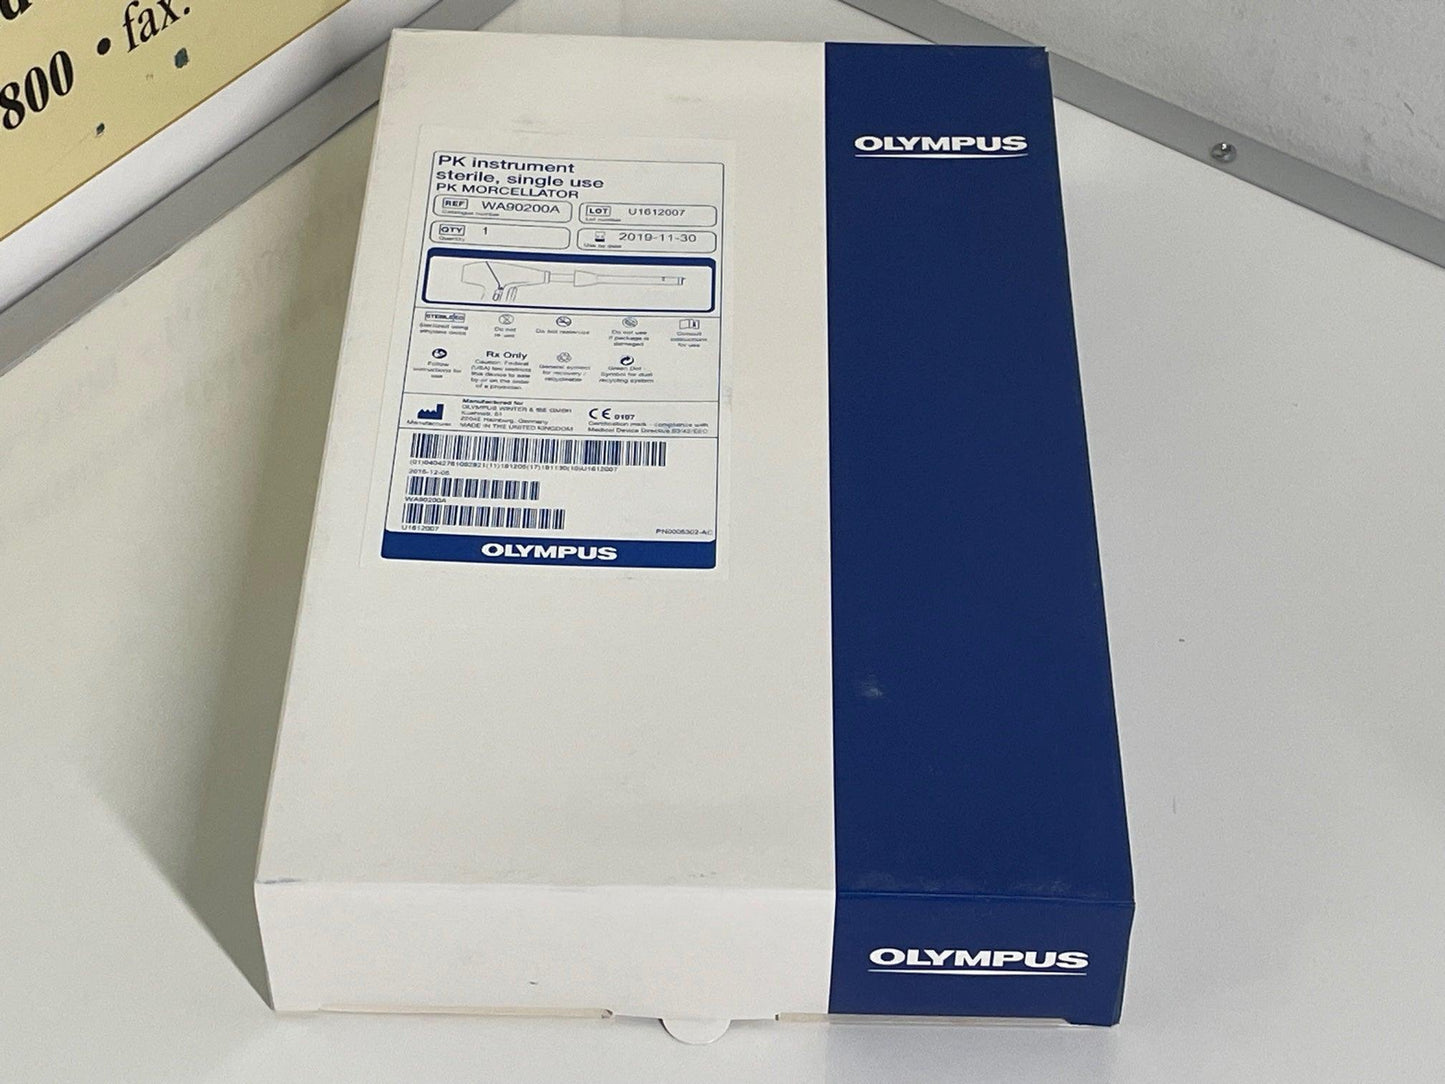 NEW Each Olympus PK Instrument Sterile Single Use PK Morcellator WA90200A